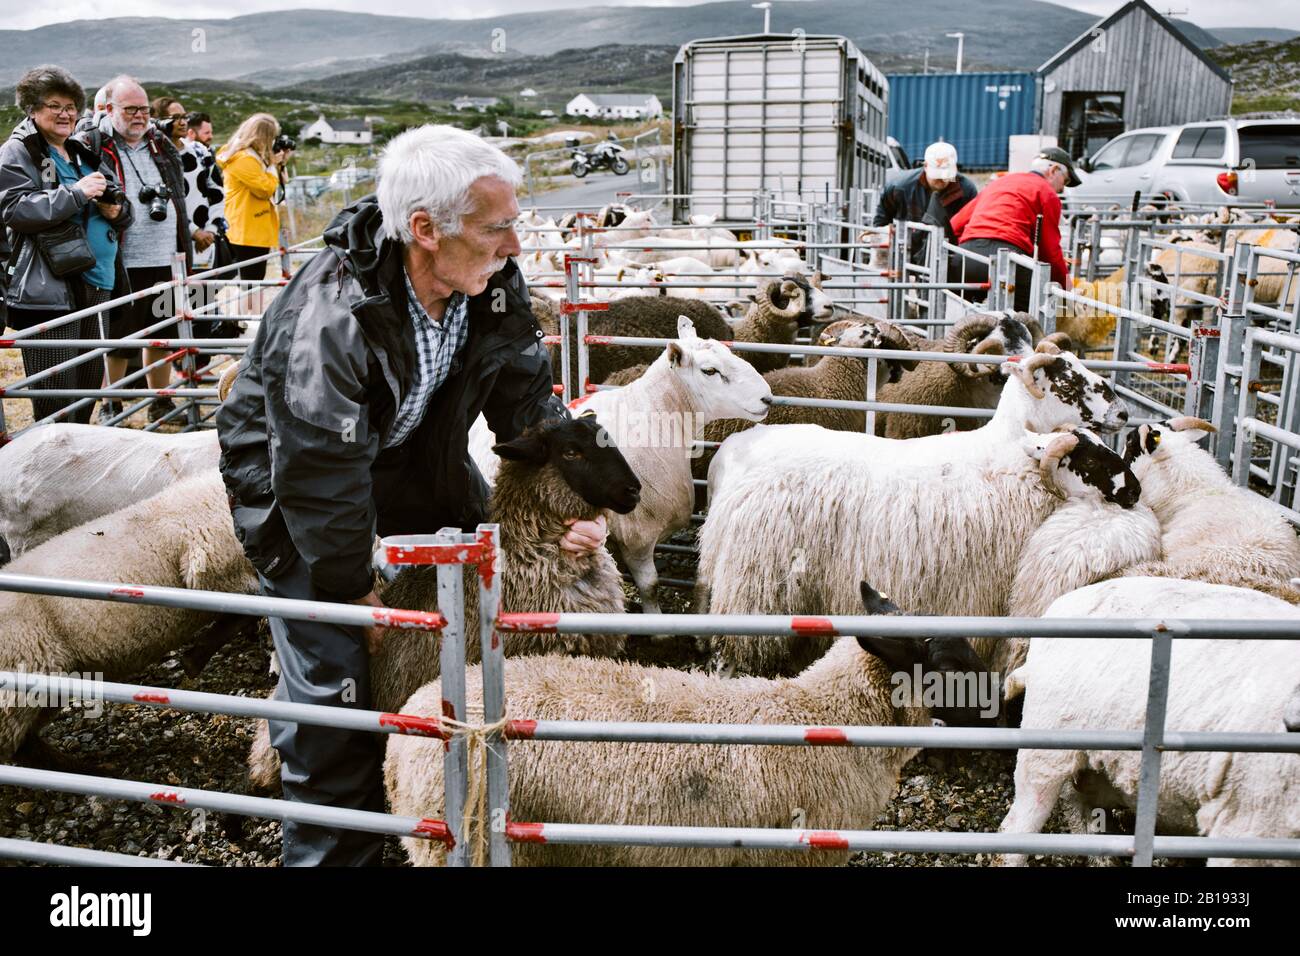 Farmer catching sheep in pen at North Harris Agricultural Show, Tarbert, Isle of Harris, Outer Hebrides, Scotland Stock Photo